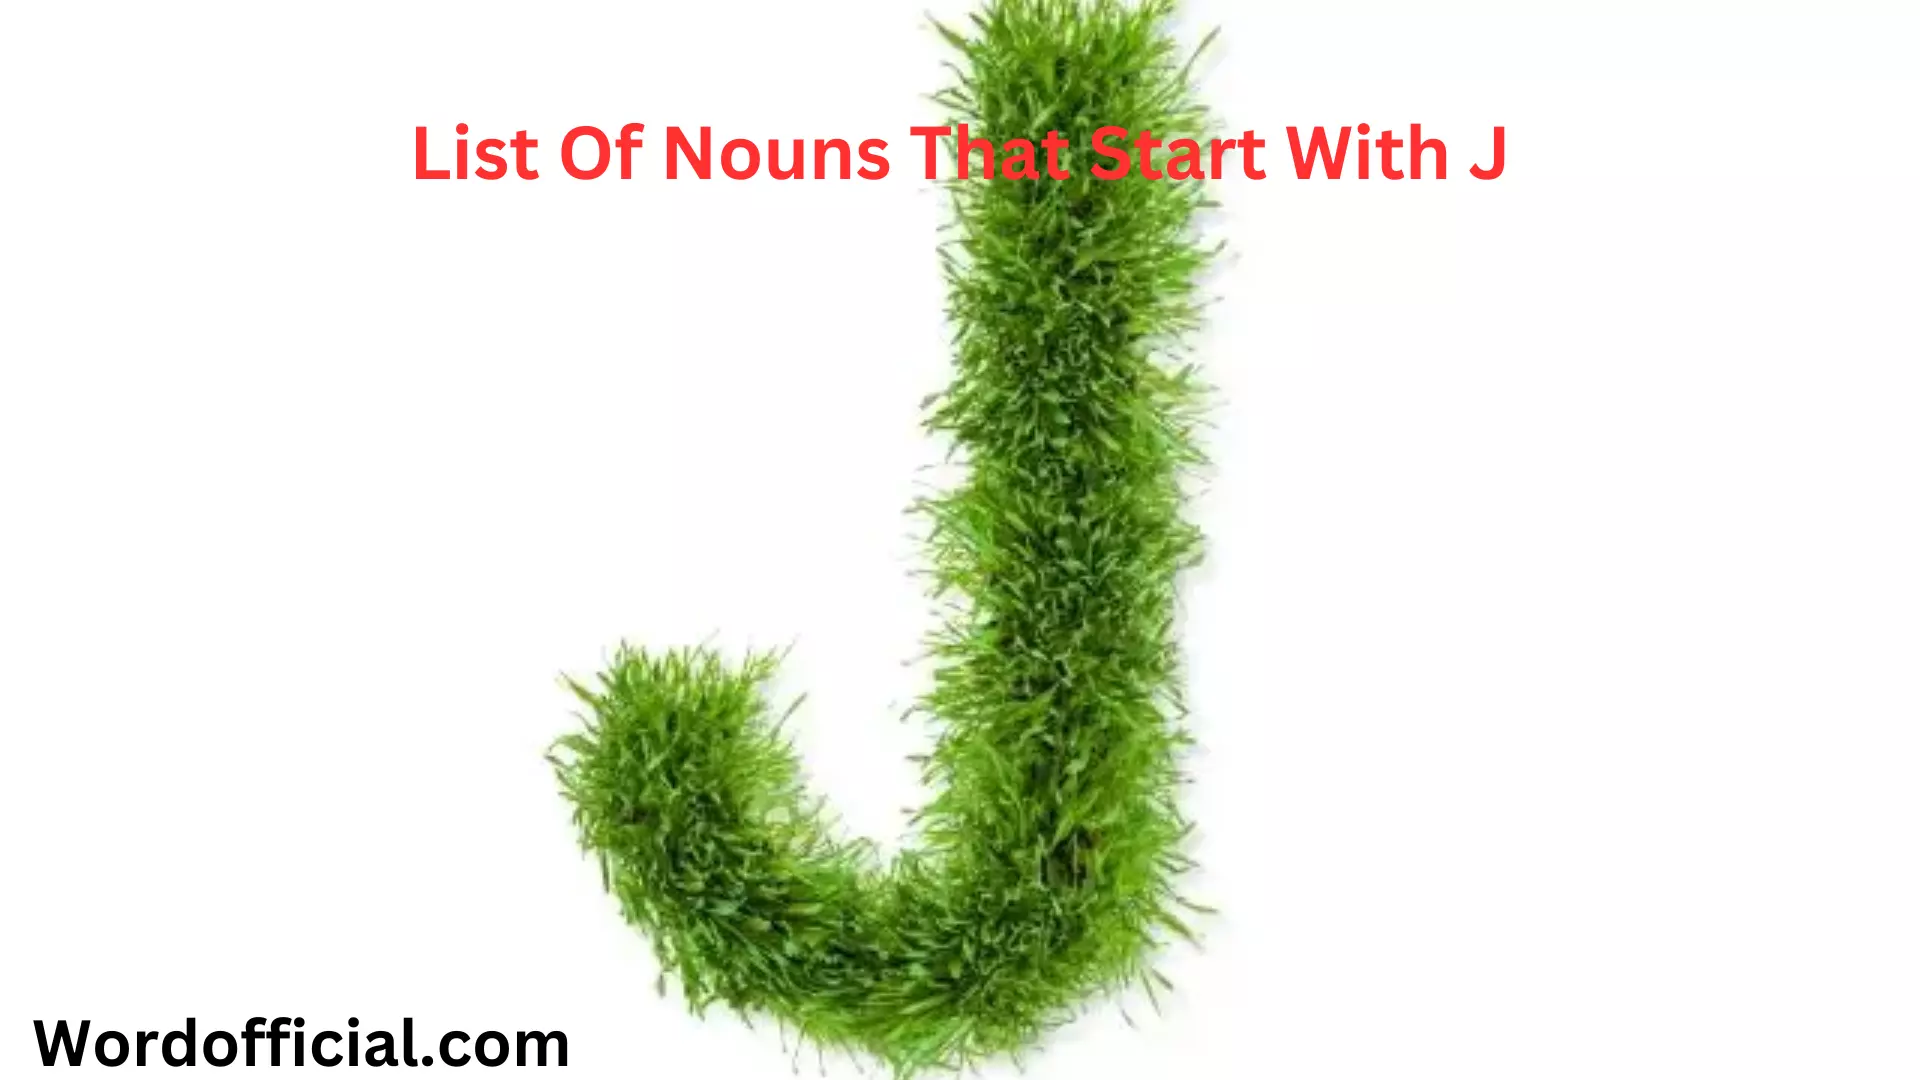 List Of Nouns That Start With J